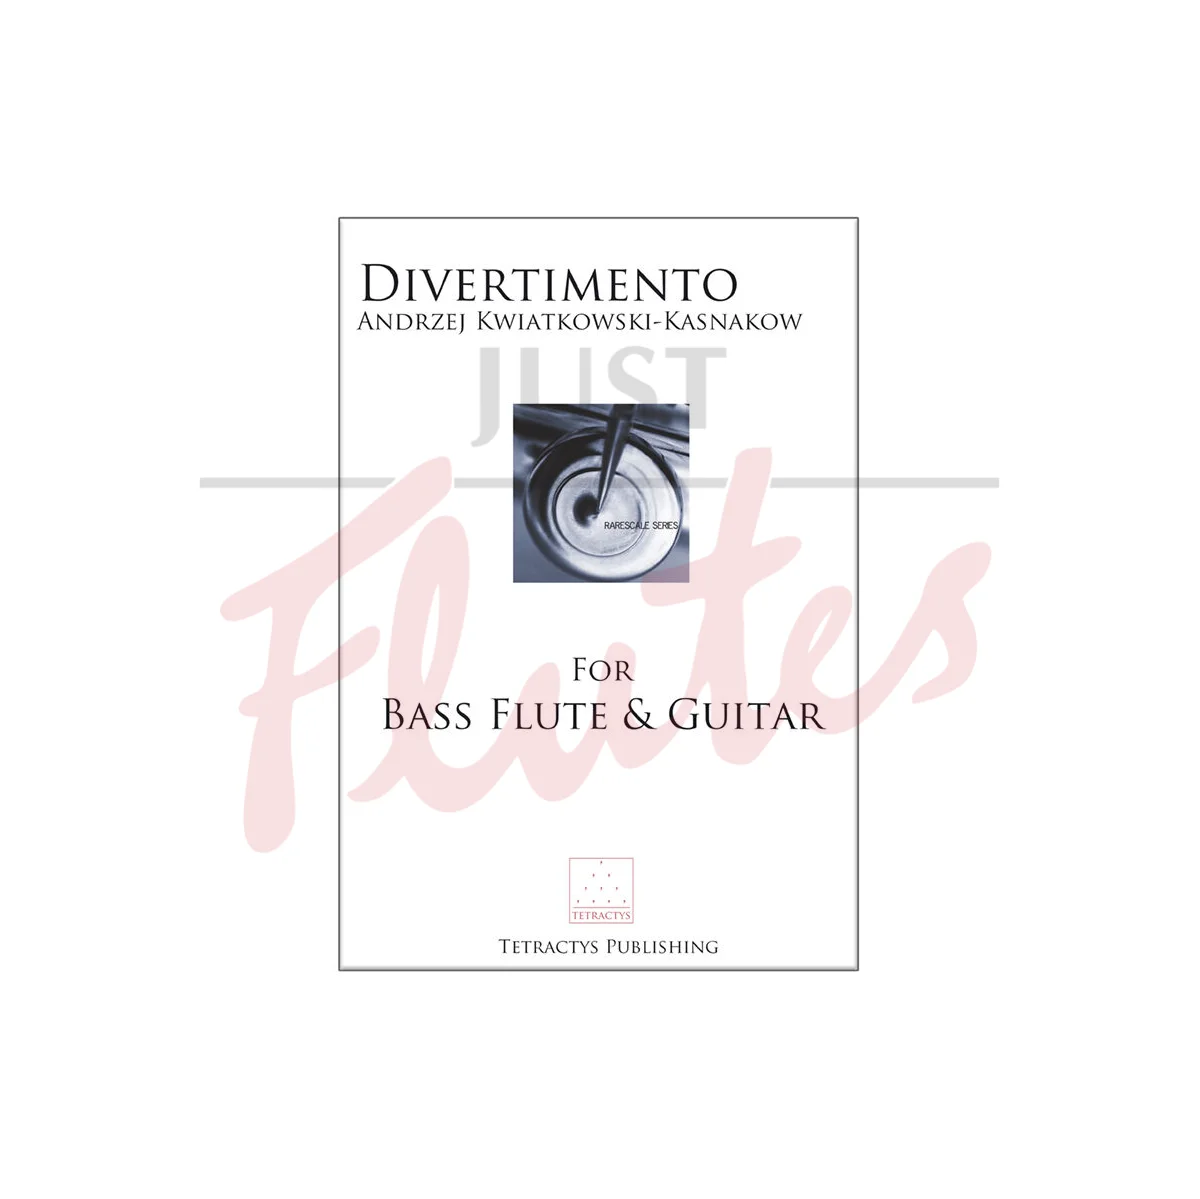 Divertimento for Bass Flute and Guitar